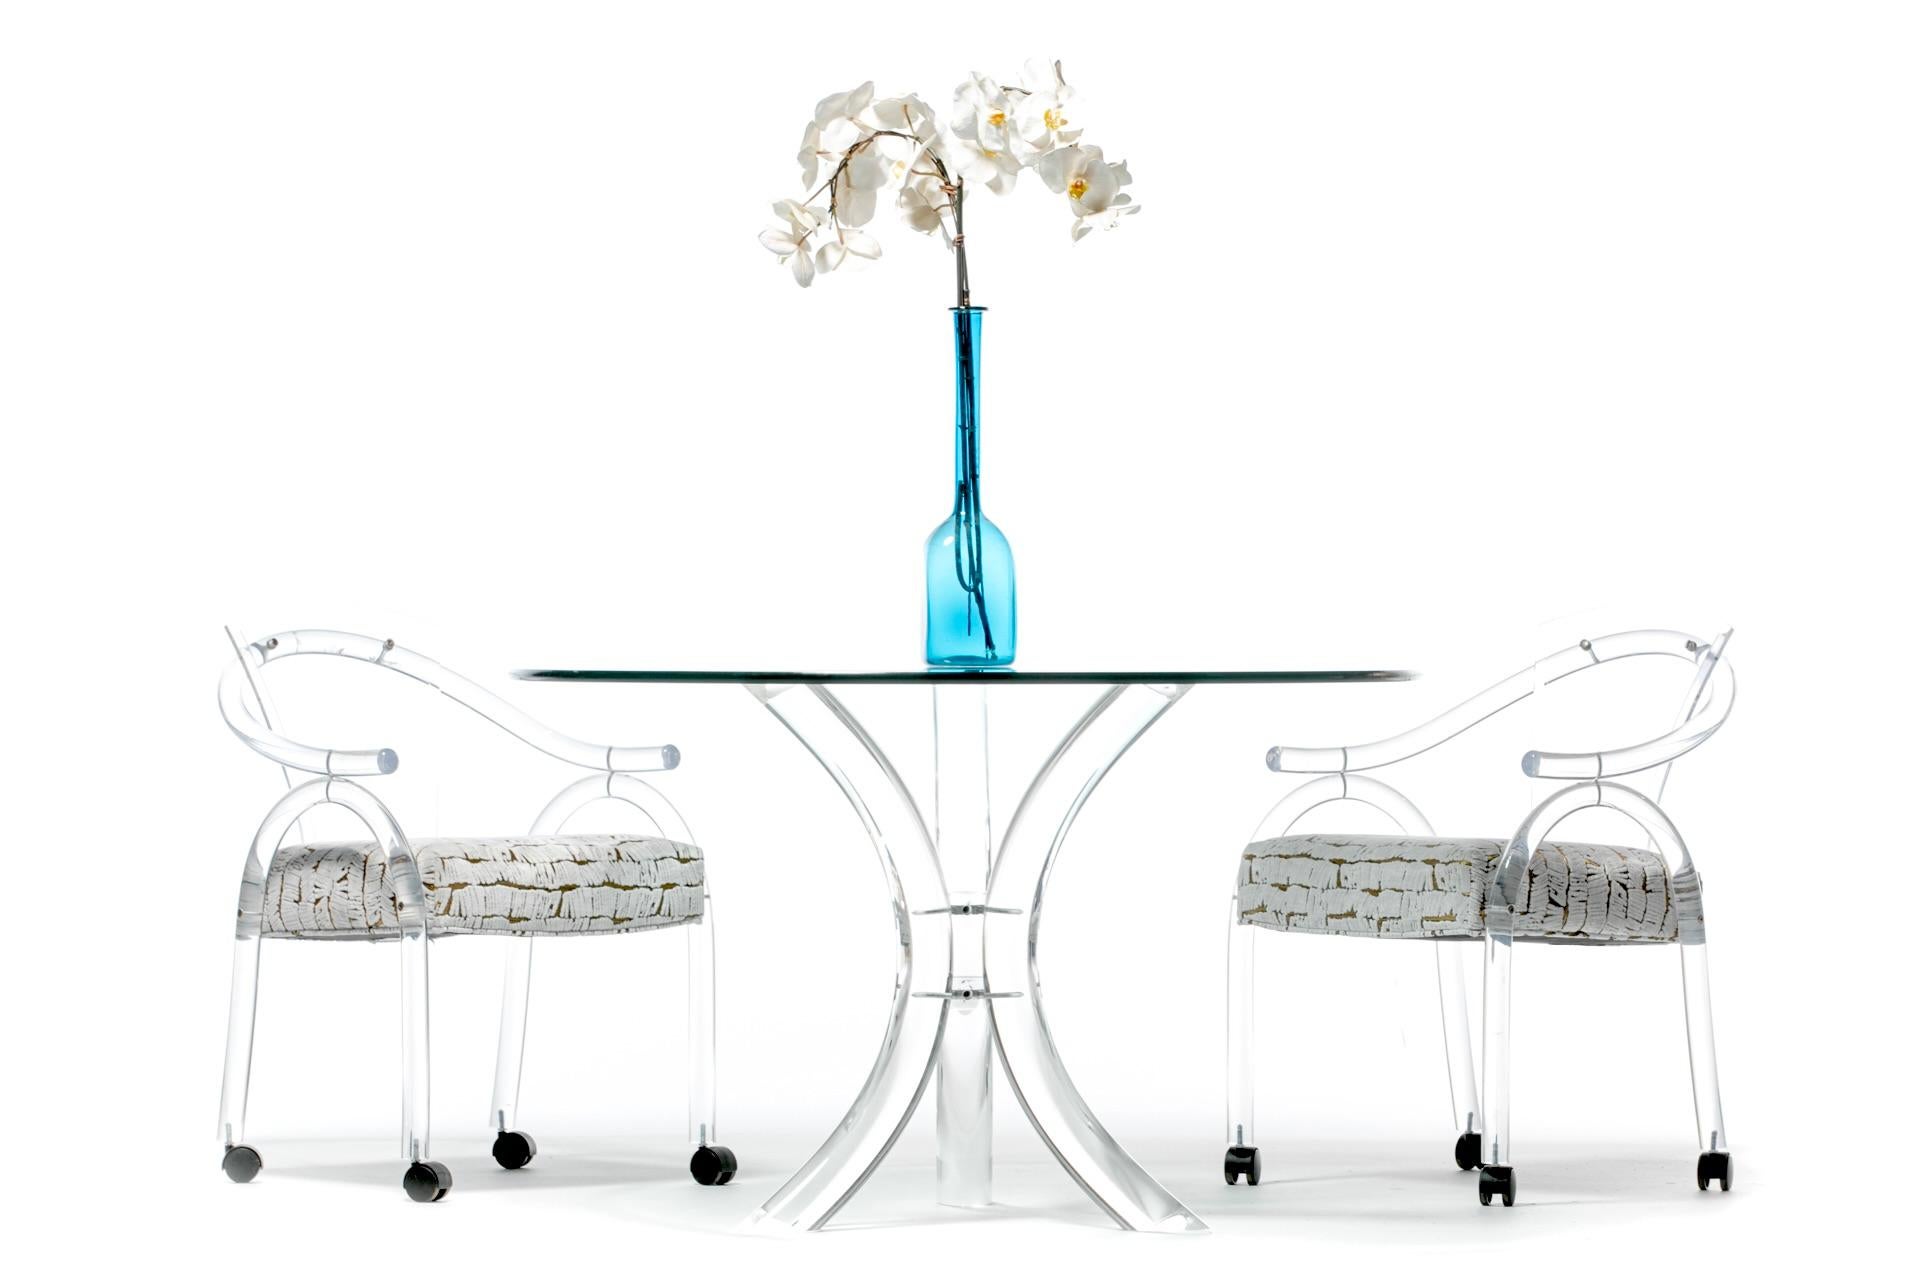 Sculptural 1980s Lucite Tusk Mid Century Modern Table similar in material and form to Charles Hollis Jones pieces. The look is clean. Modern. Air and light. This table is a great choice for open floor plans to allow for the passage of light and